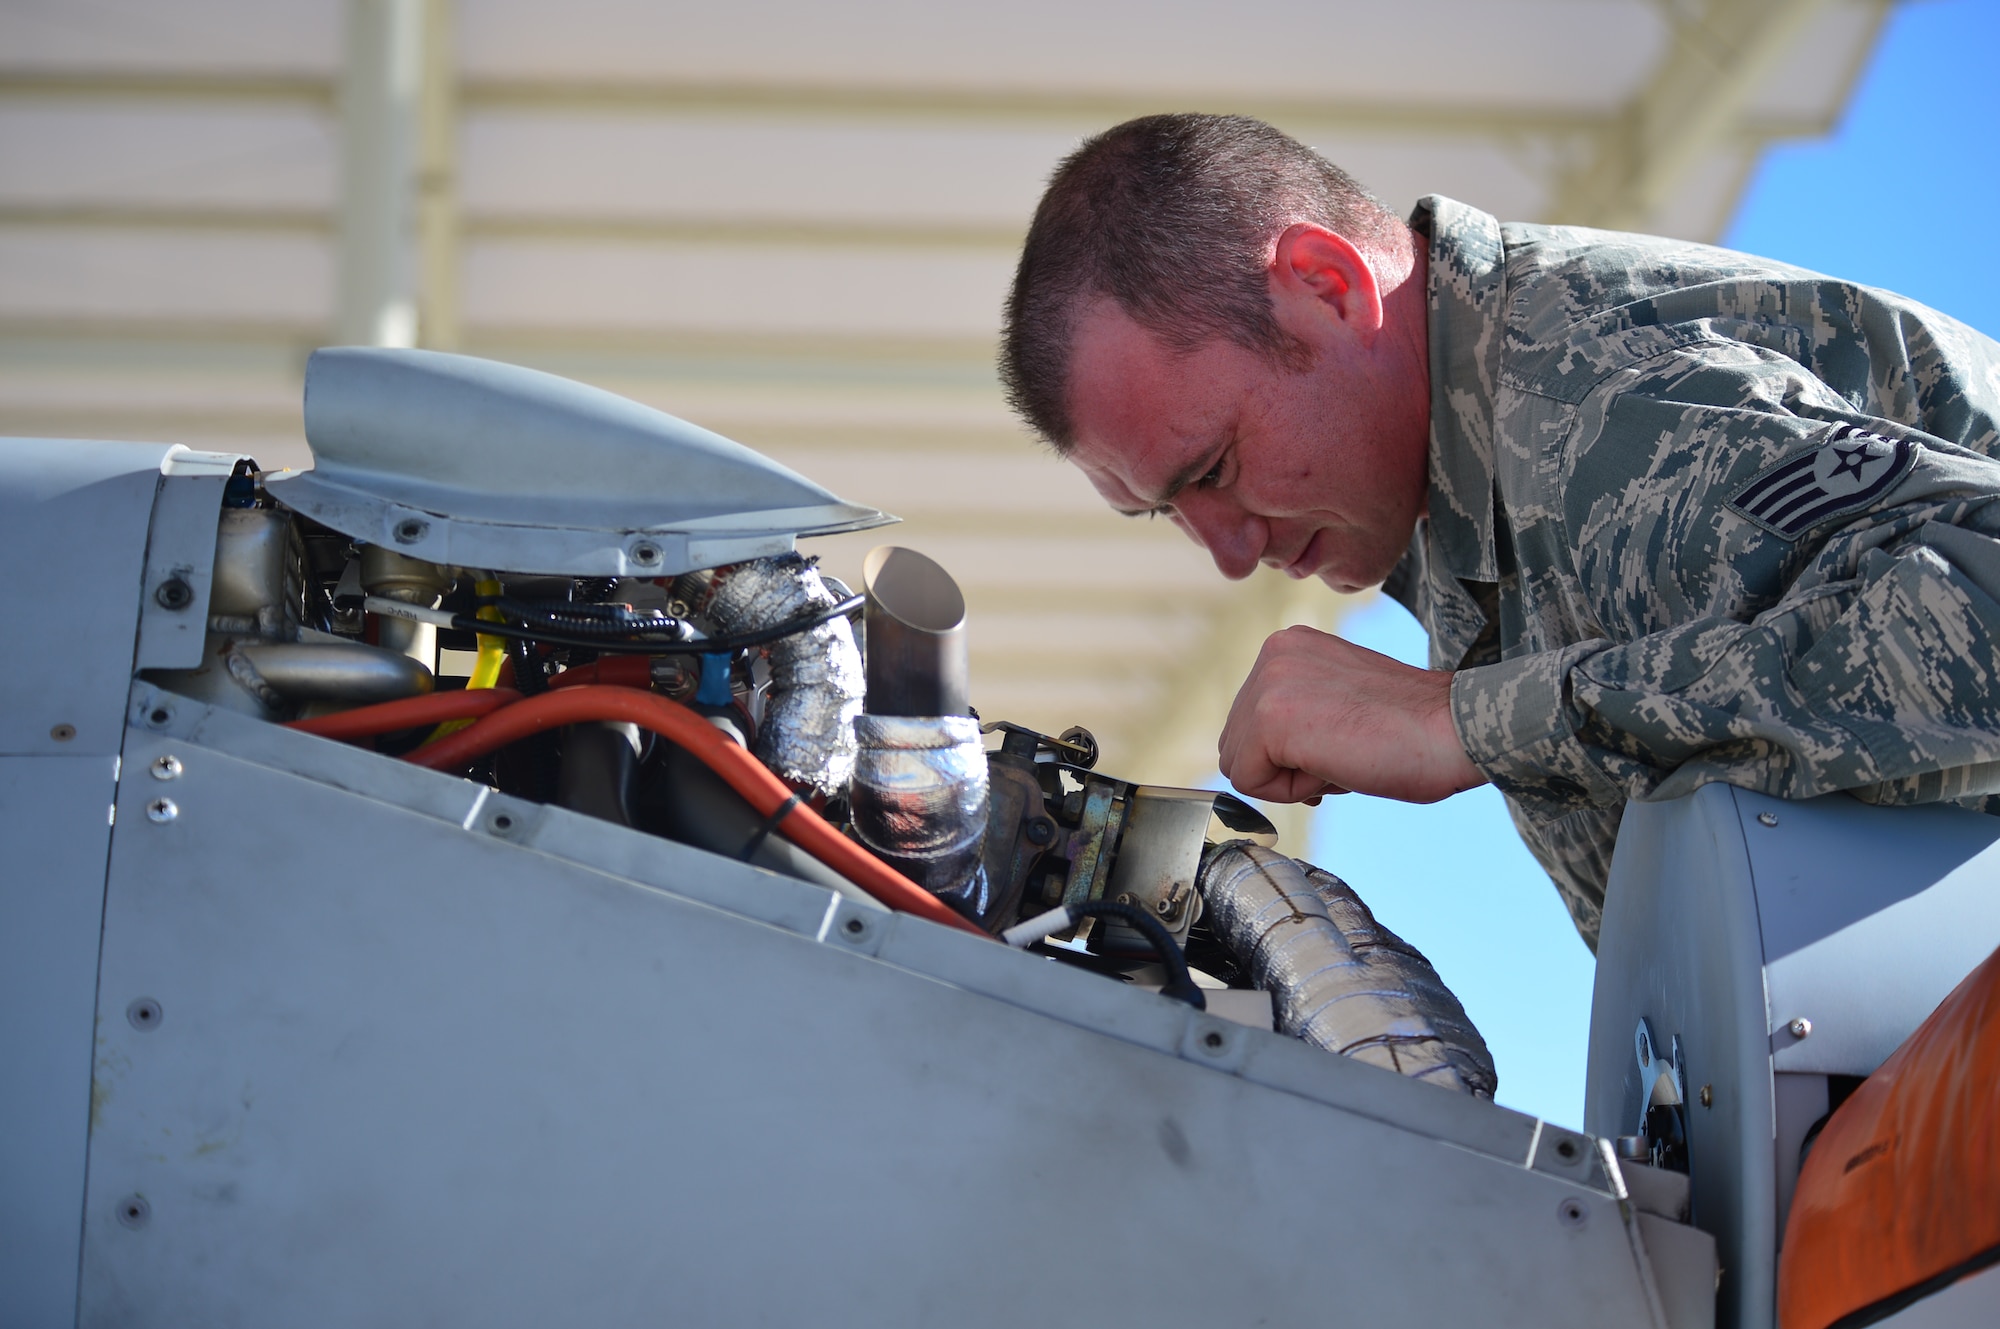 LAS VEGAS, Nev -- A crew chief from the 432nd Aircraft Maintenance Squadron inspects the engine of an MQ-1 Predator remotely piloted aircraft during a post-flight inspection Nov. 1, 2013. The MQ-1 Predator is an armed, multi-mission, medium-altitude, long-endurance RPA that is employed primarily as an intelligence-collection asset and secondarily against dynamic execution targets. The USAF’s MQ-9 Reaper and MQ-1 Predator fleet surpassed 2 million cumulative flight hours on Oct. 22, 2013. (U.S. Air Force photo by Staff Sgt. N.B./released)